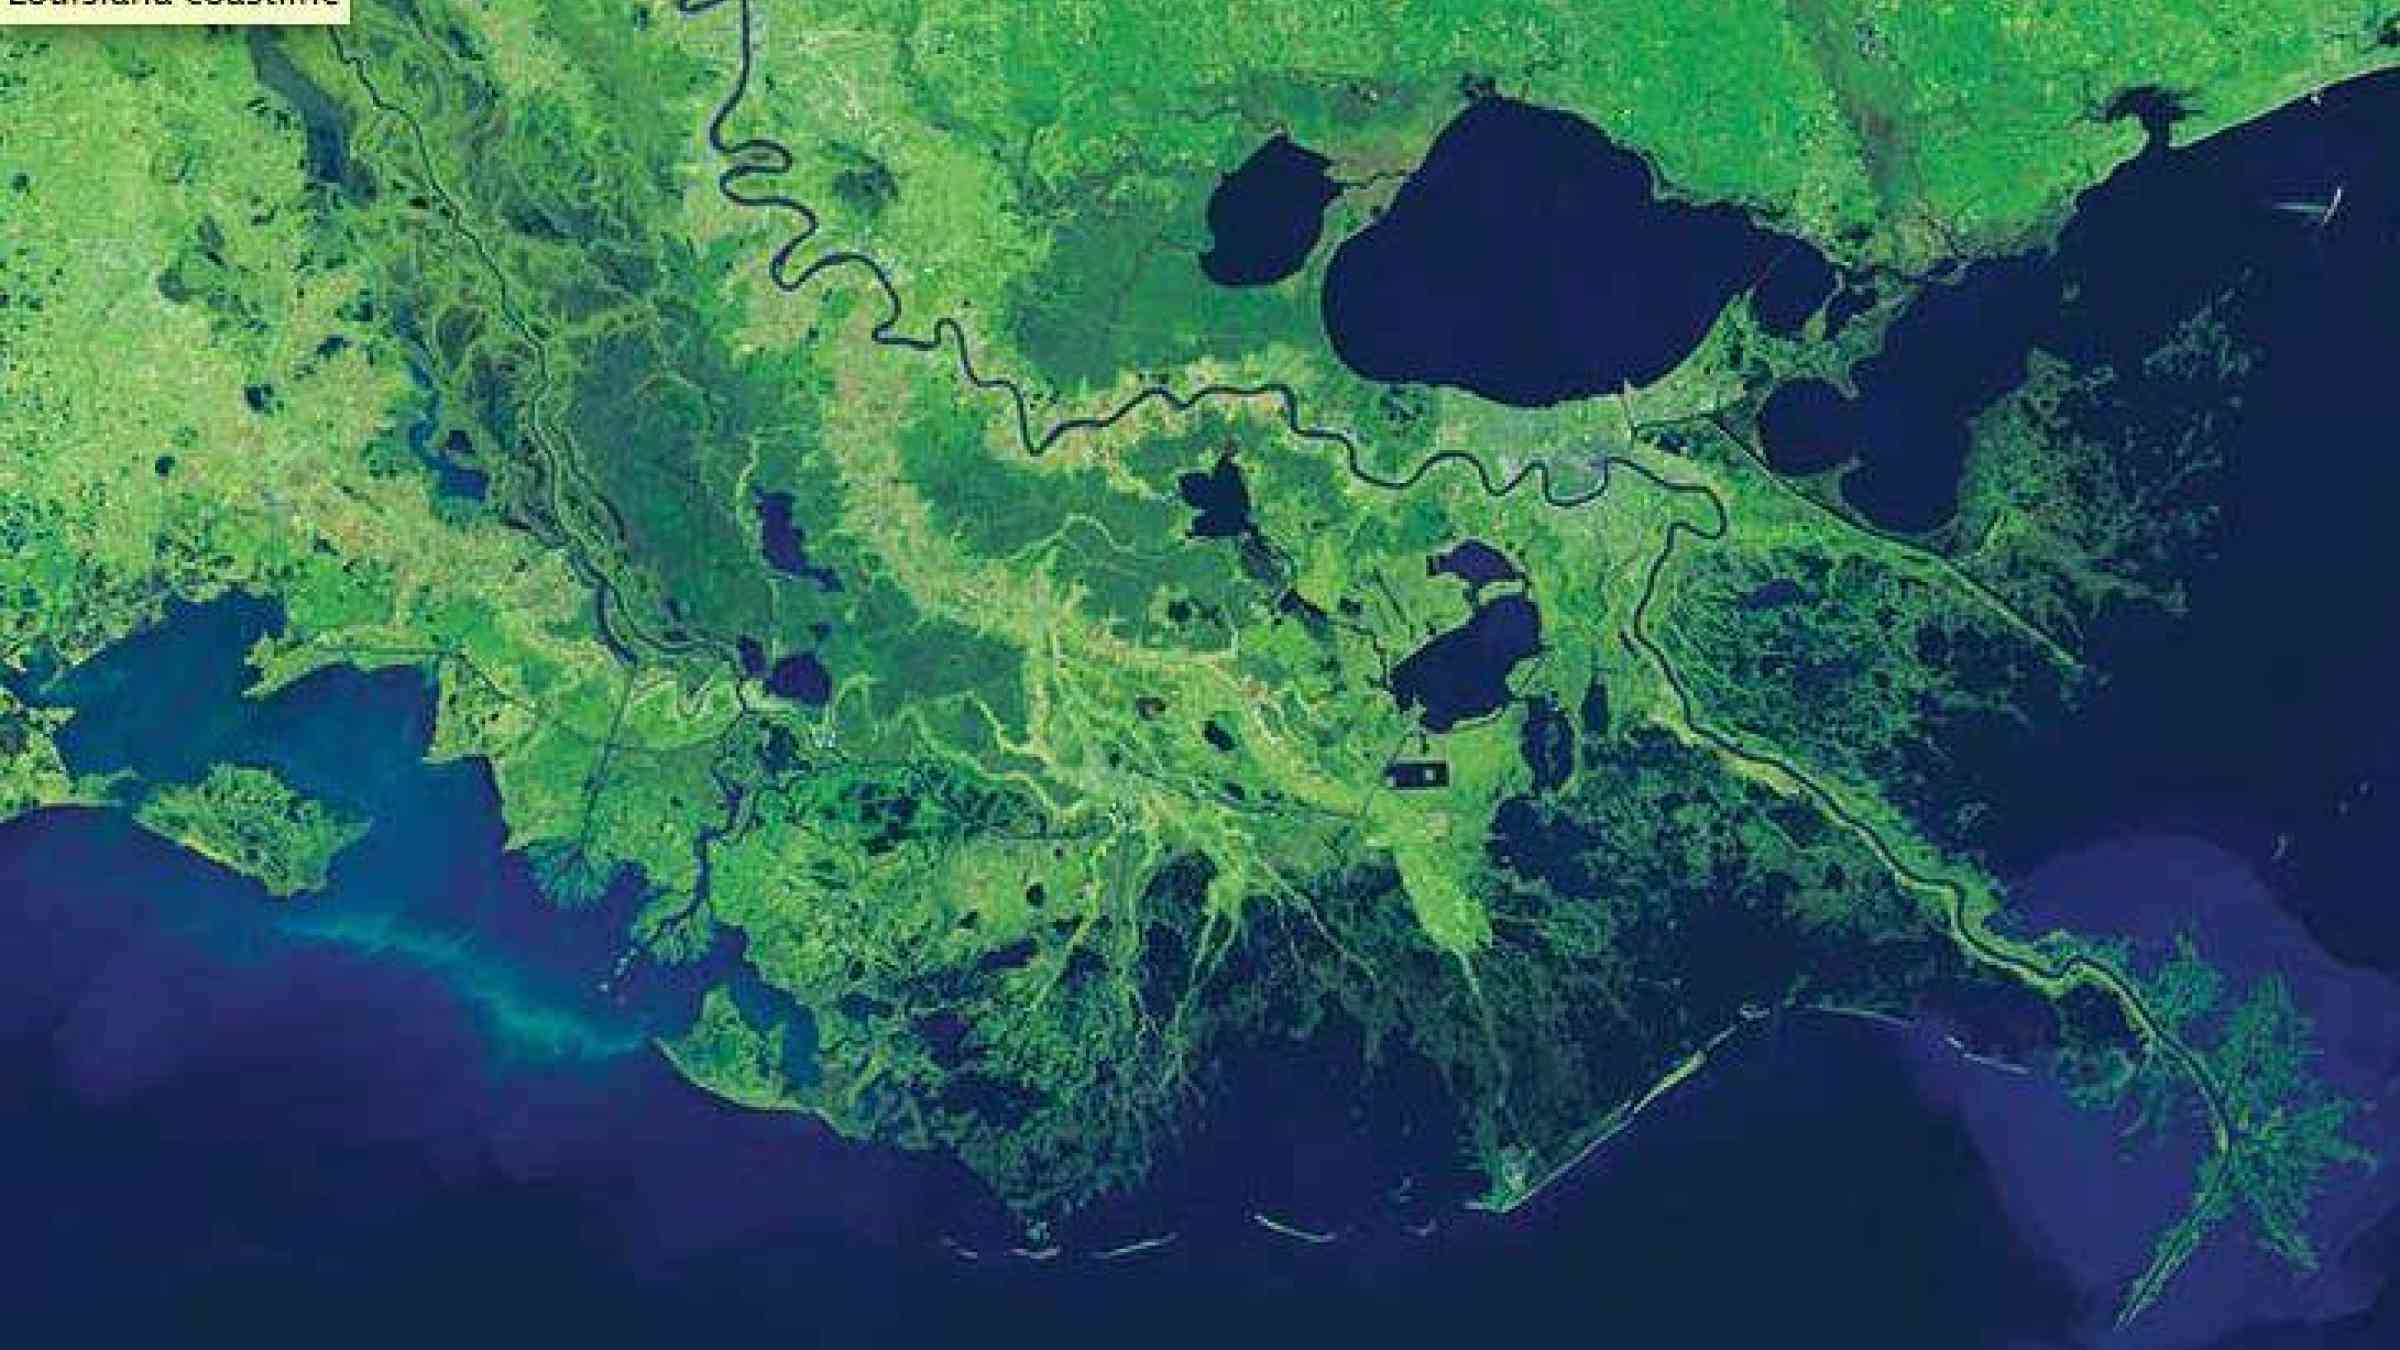 NASA Earth Observatory image from 2014 shows the Mississippi River wending toward the Louisiana coastline. (Image from earthobservatory.nasa.gov)